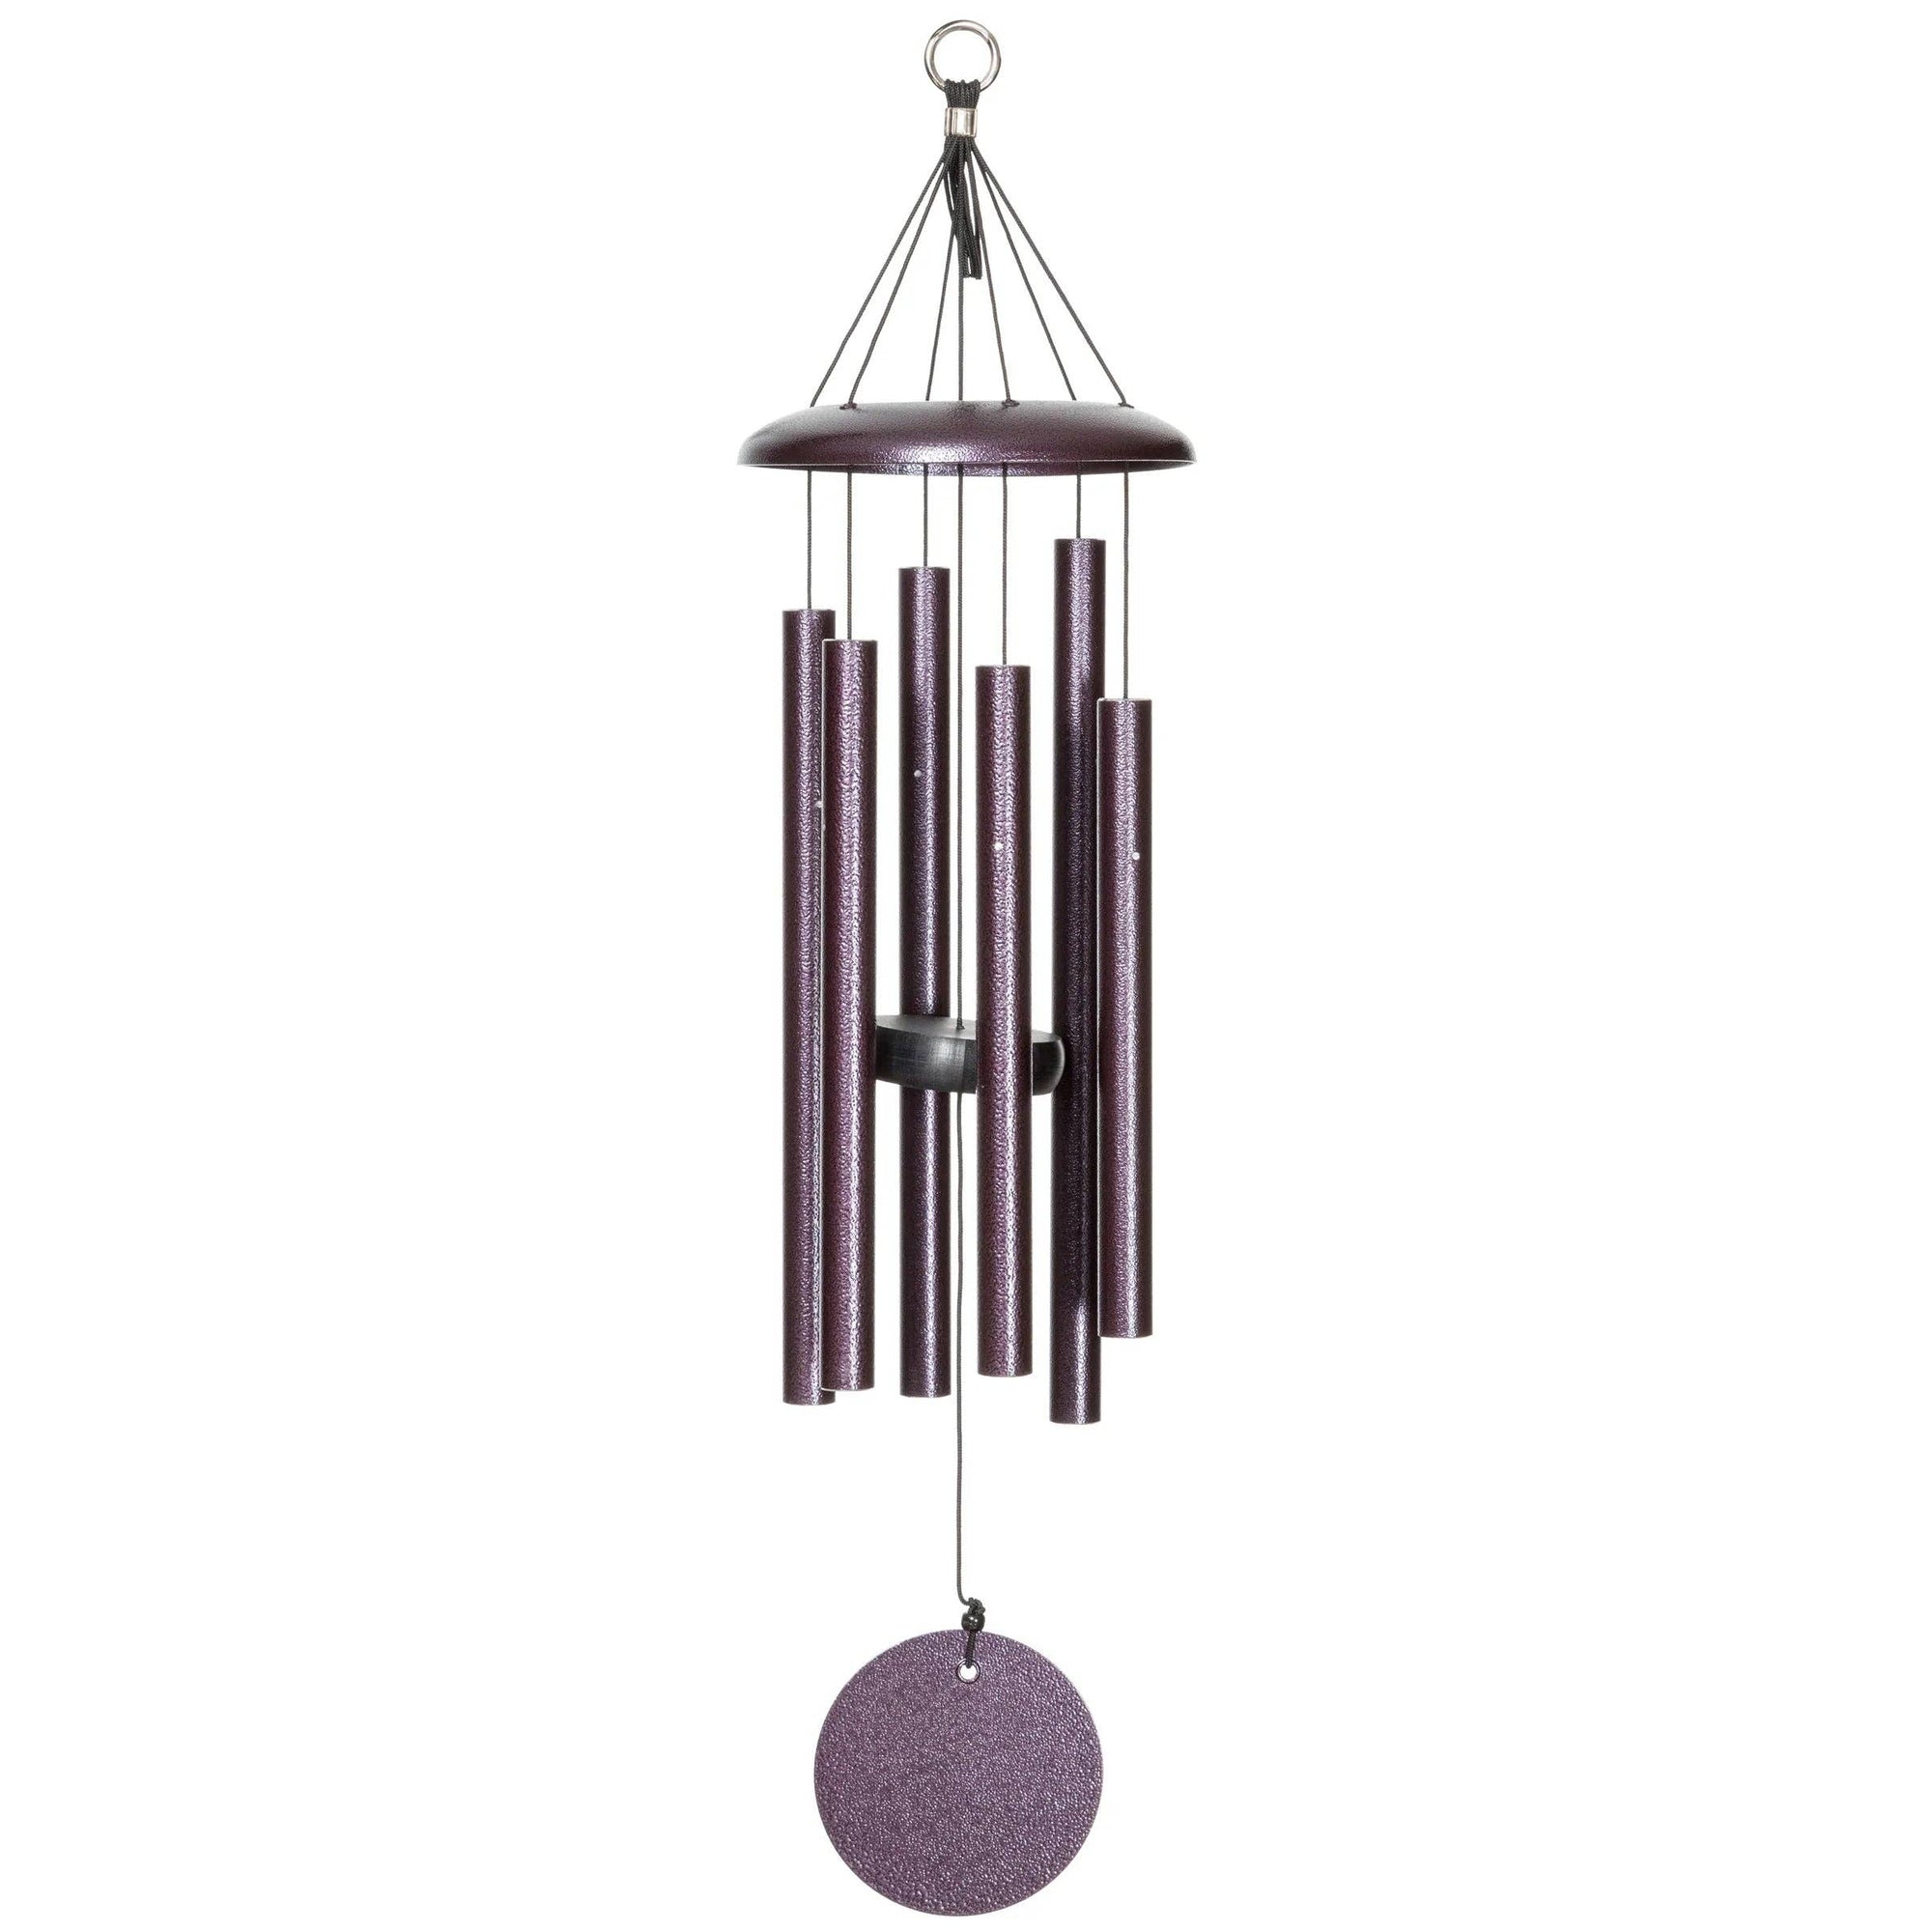 An affordable 27" Windchime Corinthian Bells® hanging on a white background, perfect for compact-sized decor.